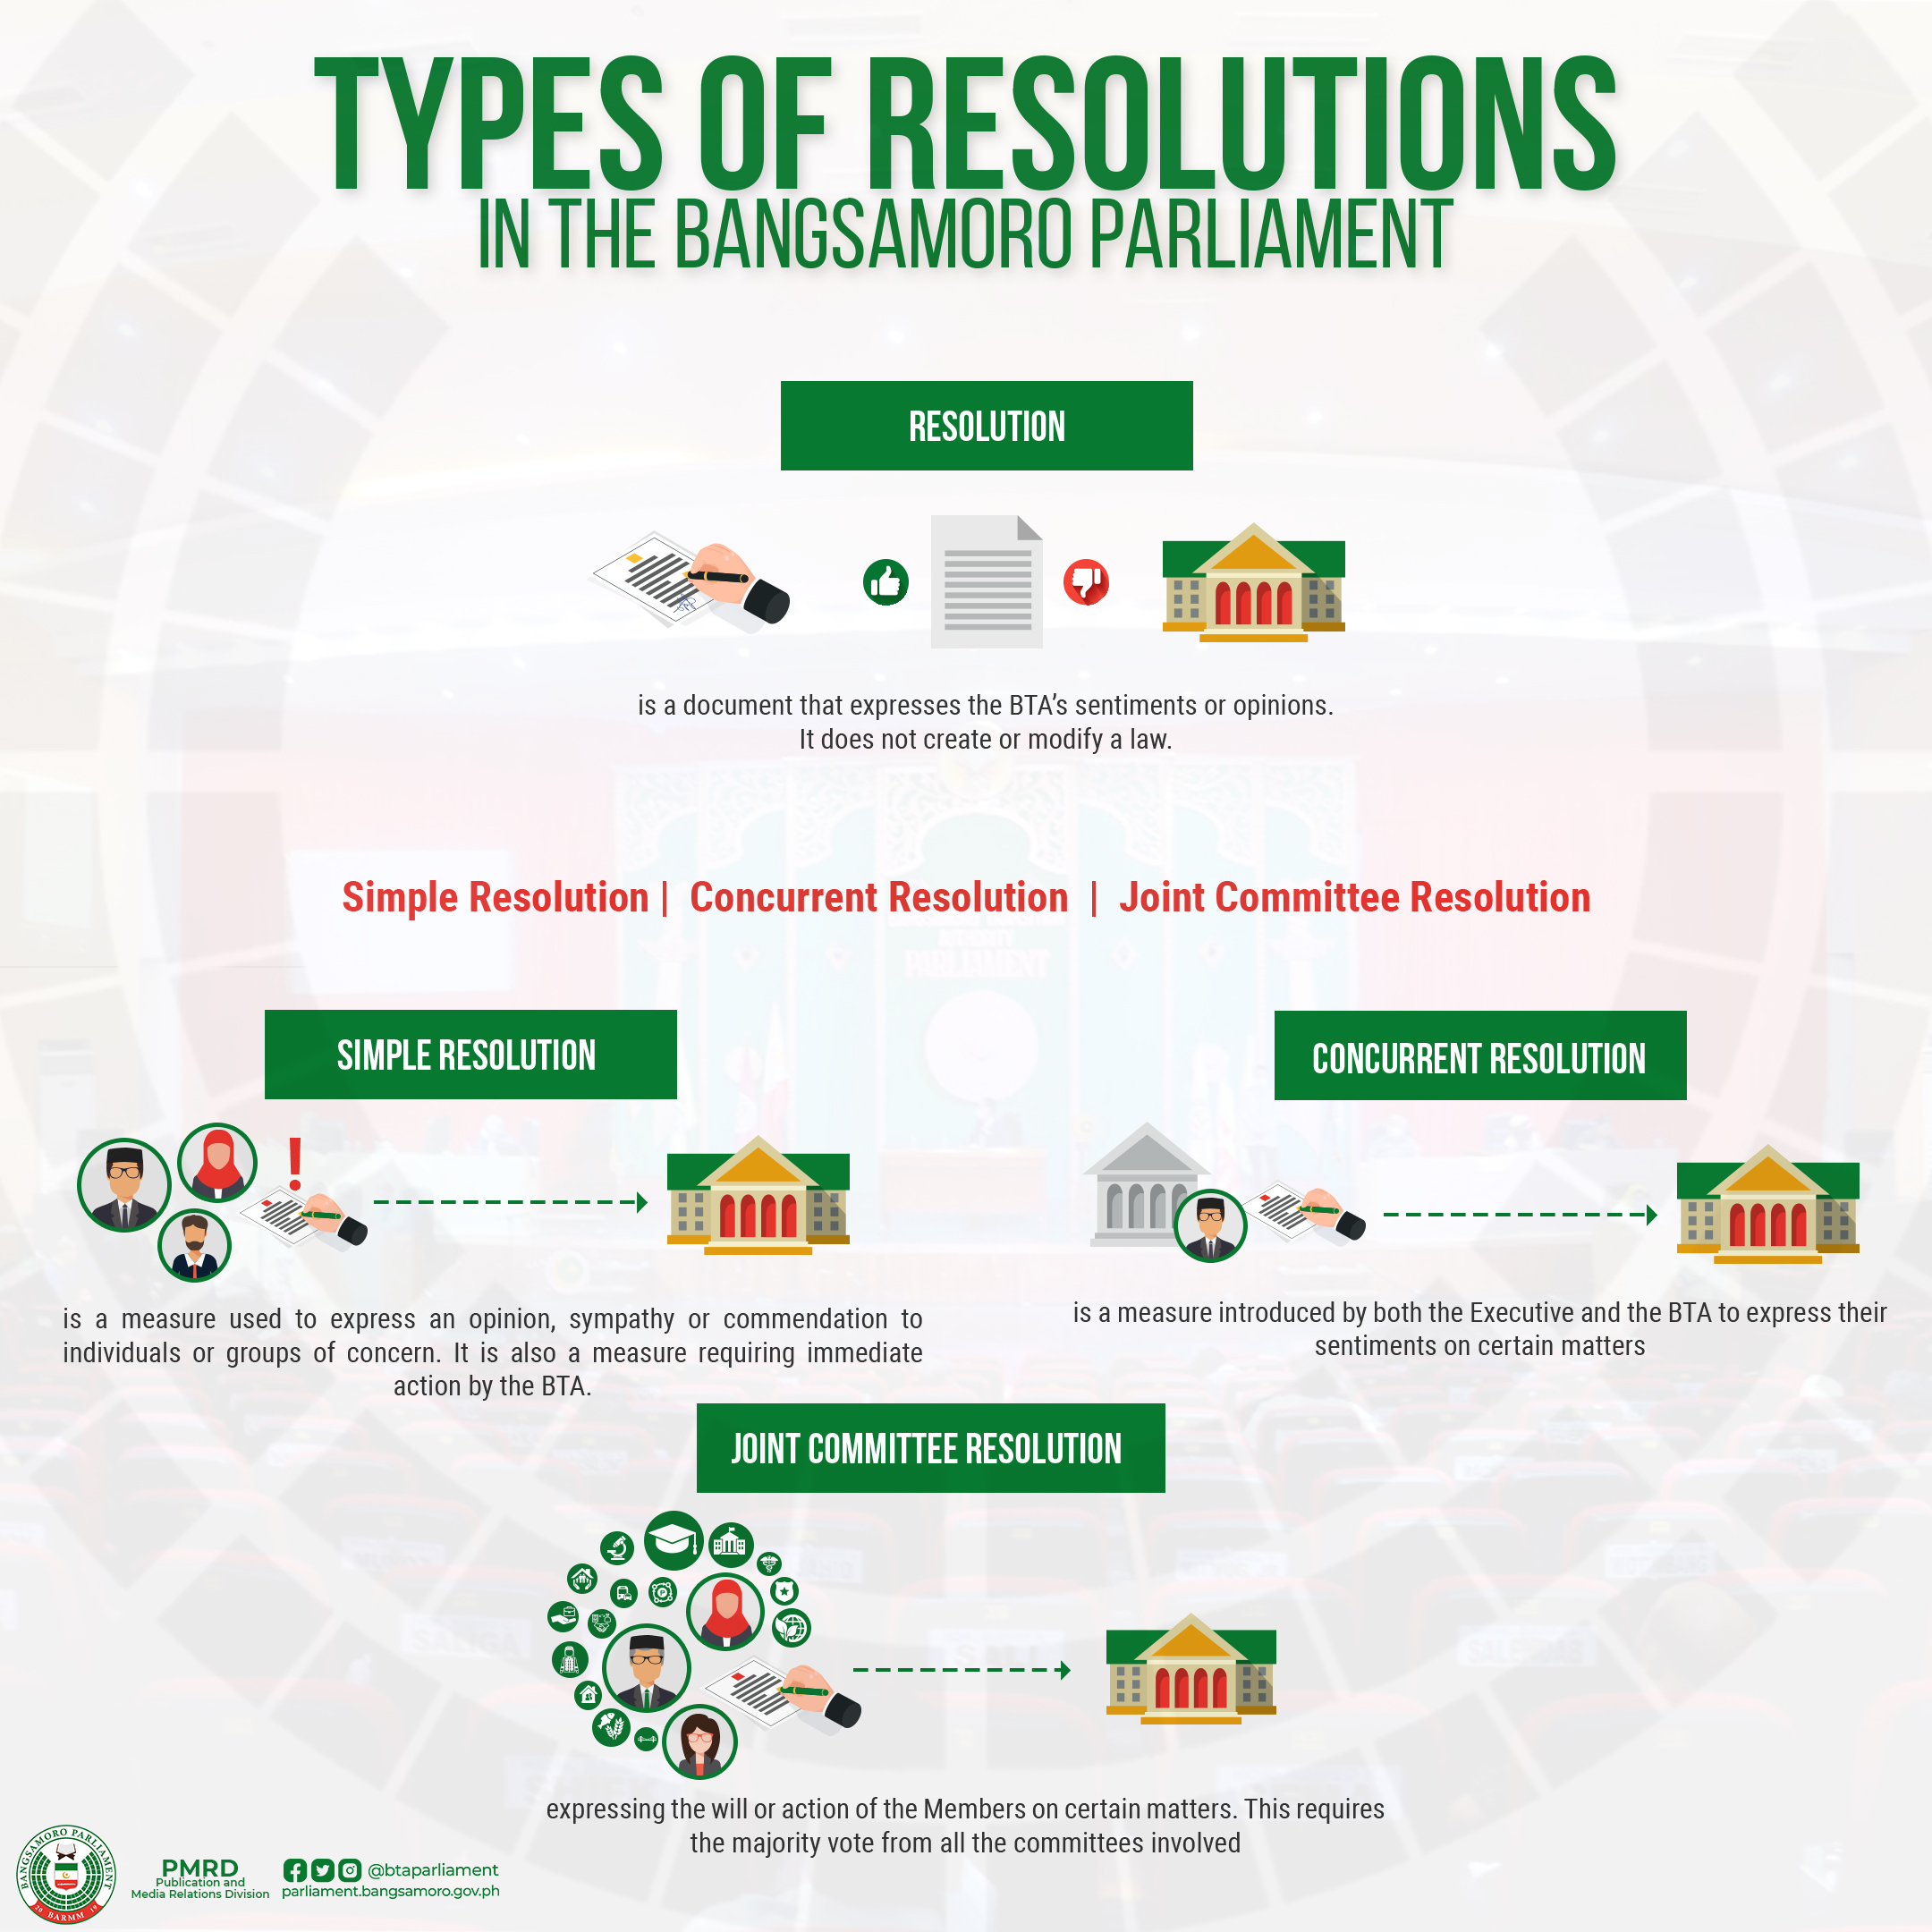 Types of Resolutions in the Bangsamoro Parliament